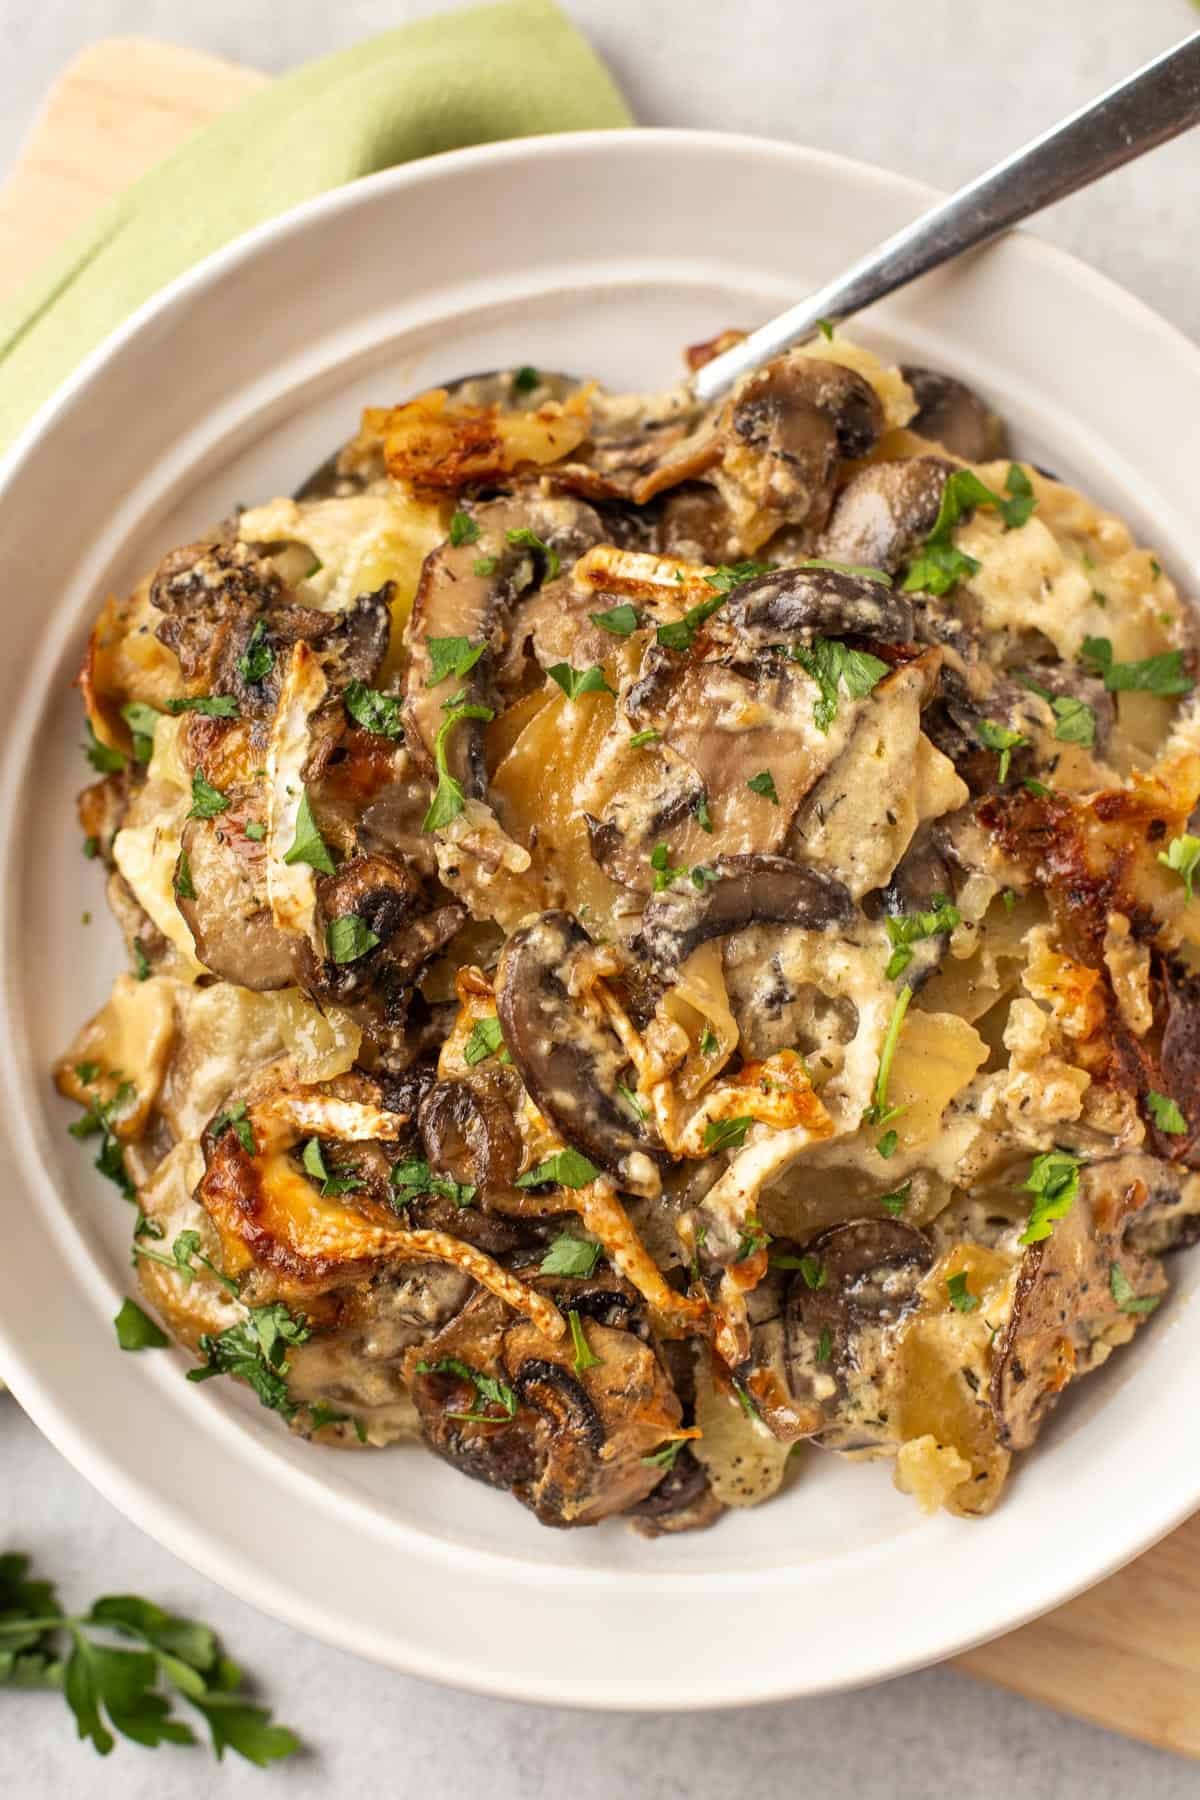 Mushroom and potato gratin in a bowl topped with fresh parsley.